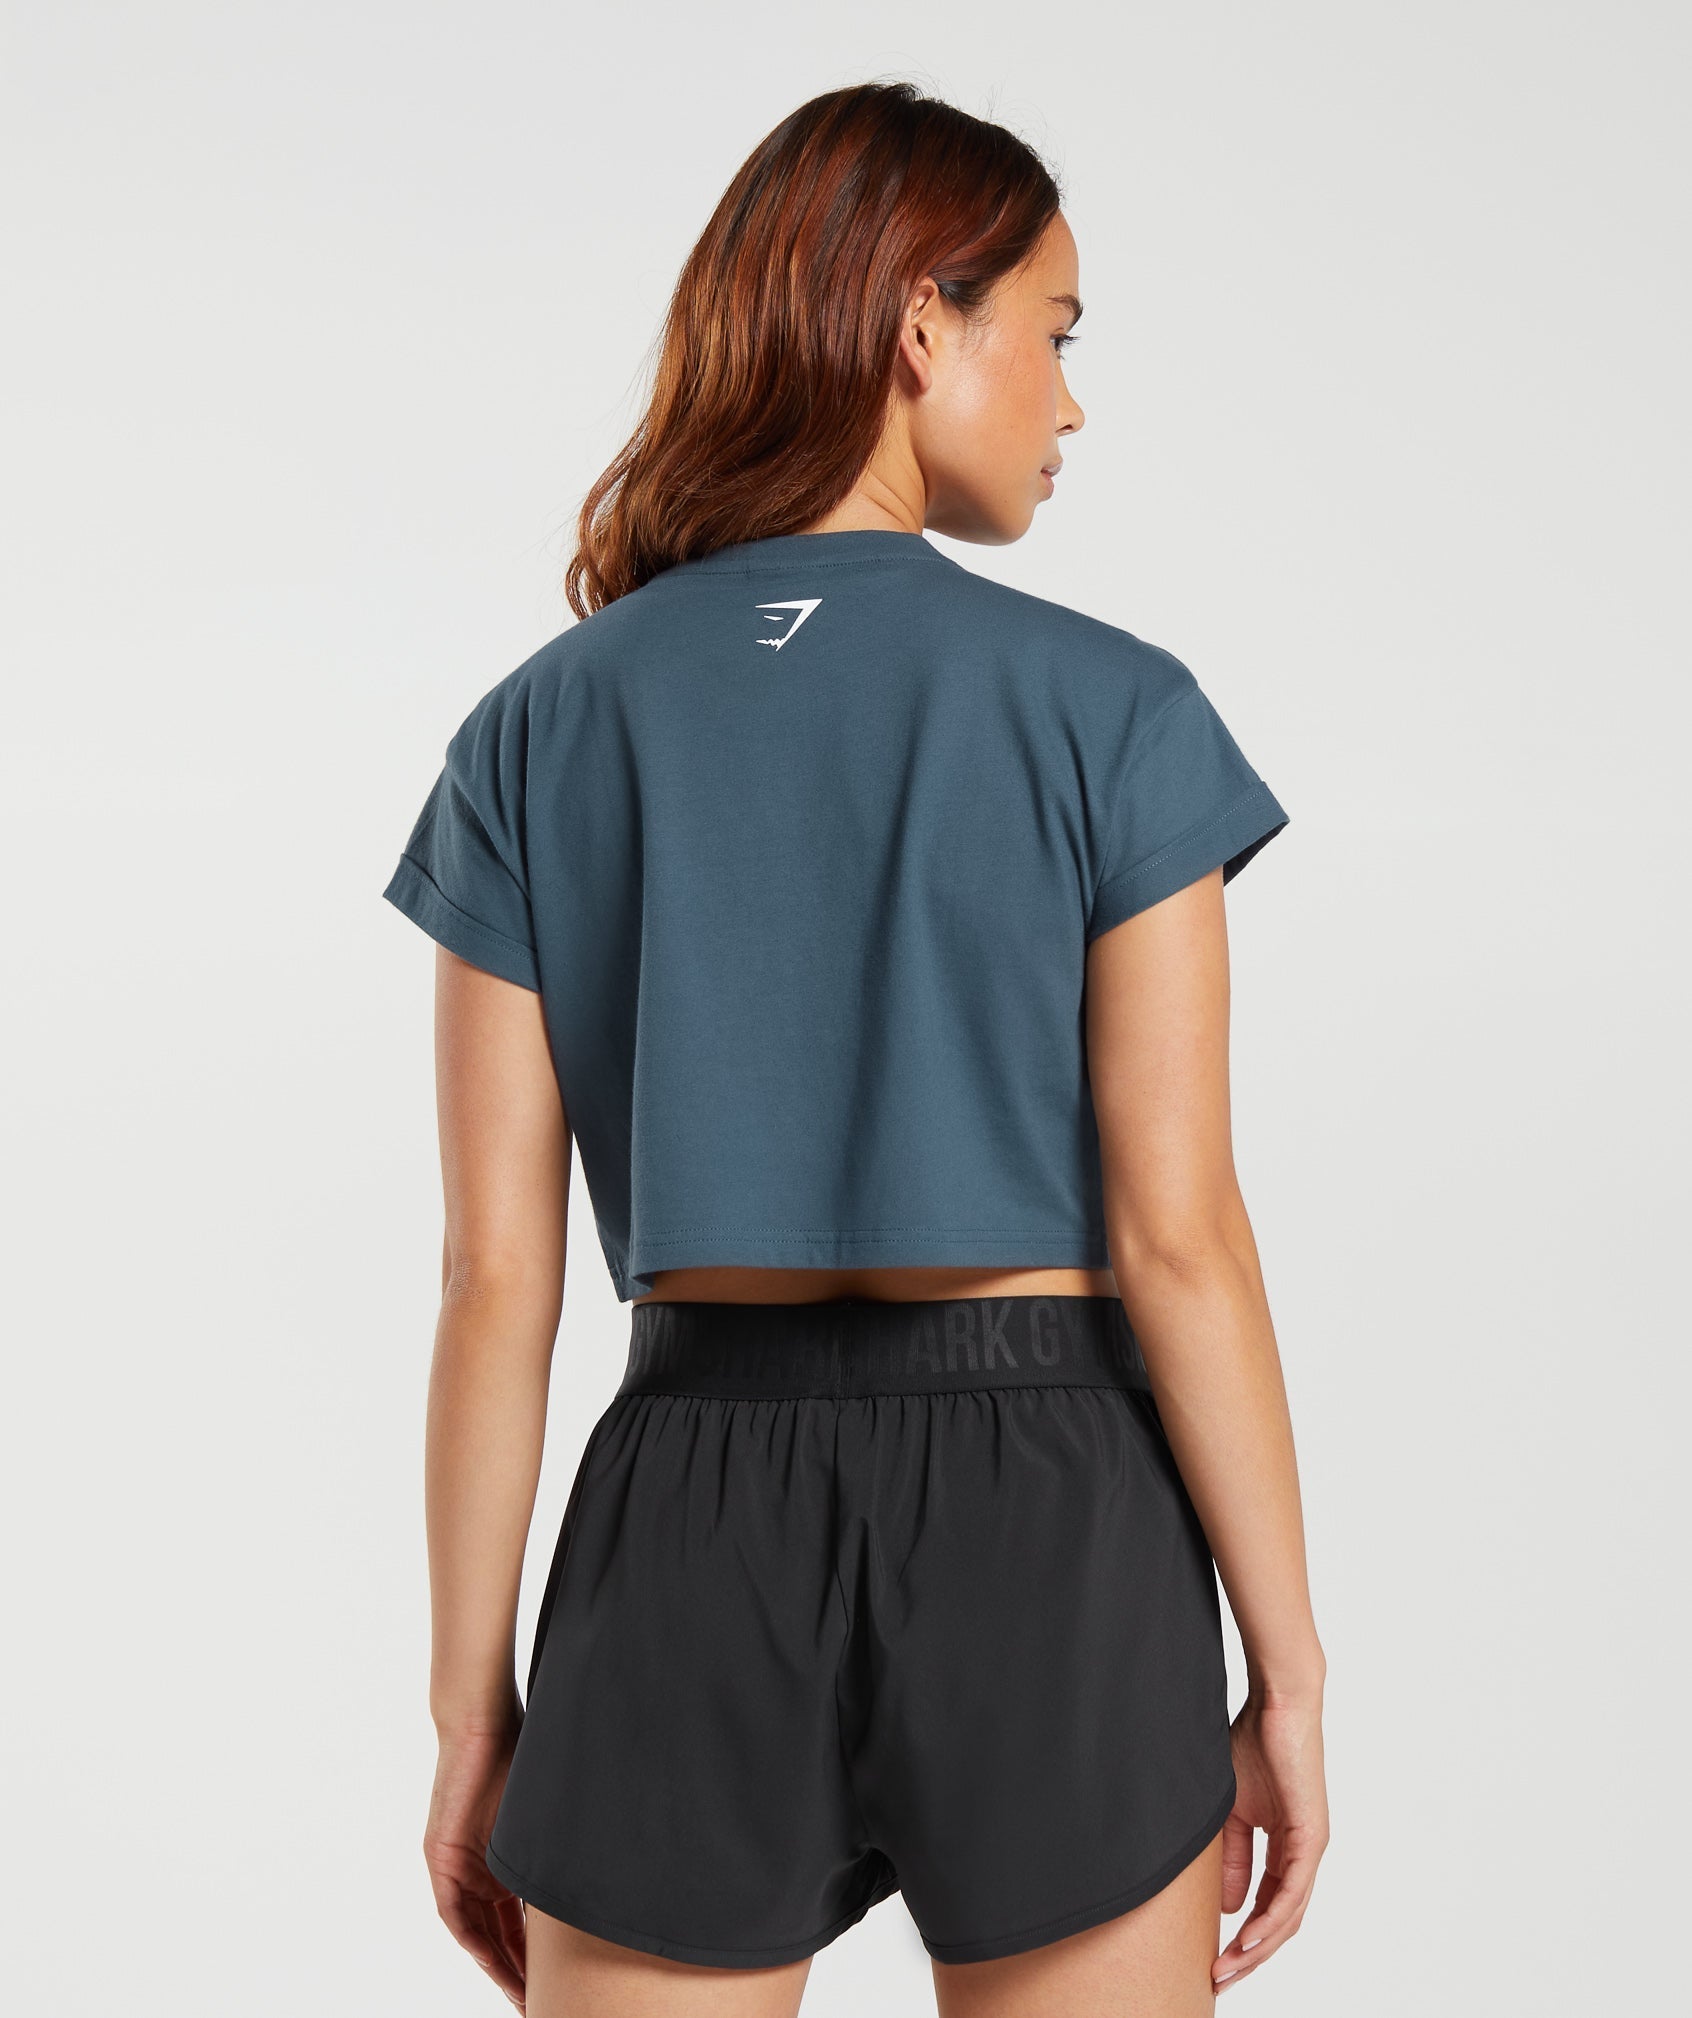 Fraction Crop Top in Smokey Teal - view 2